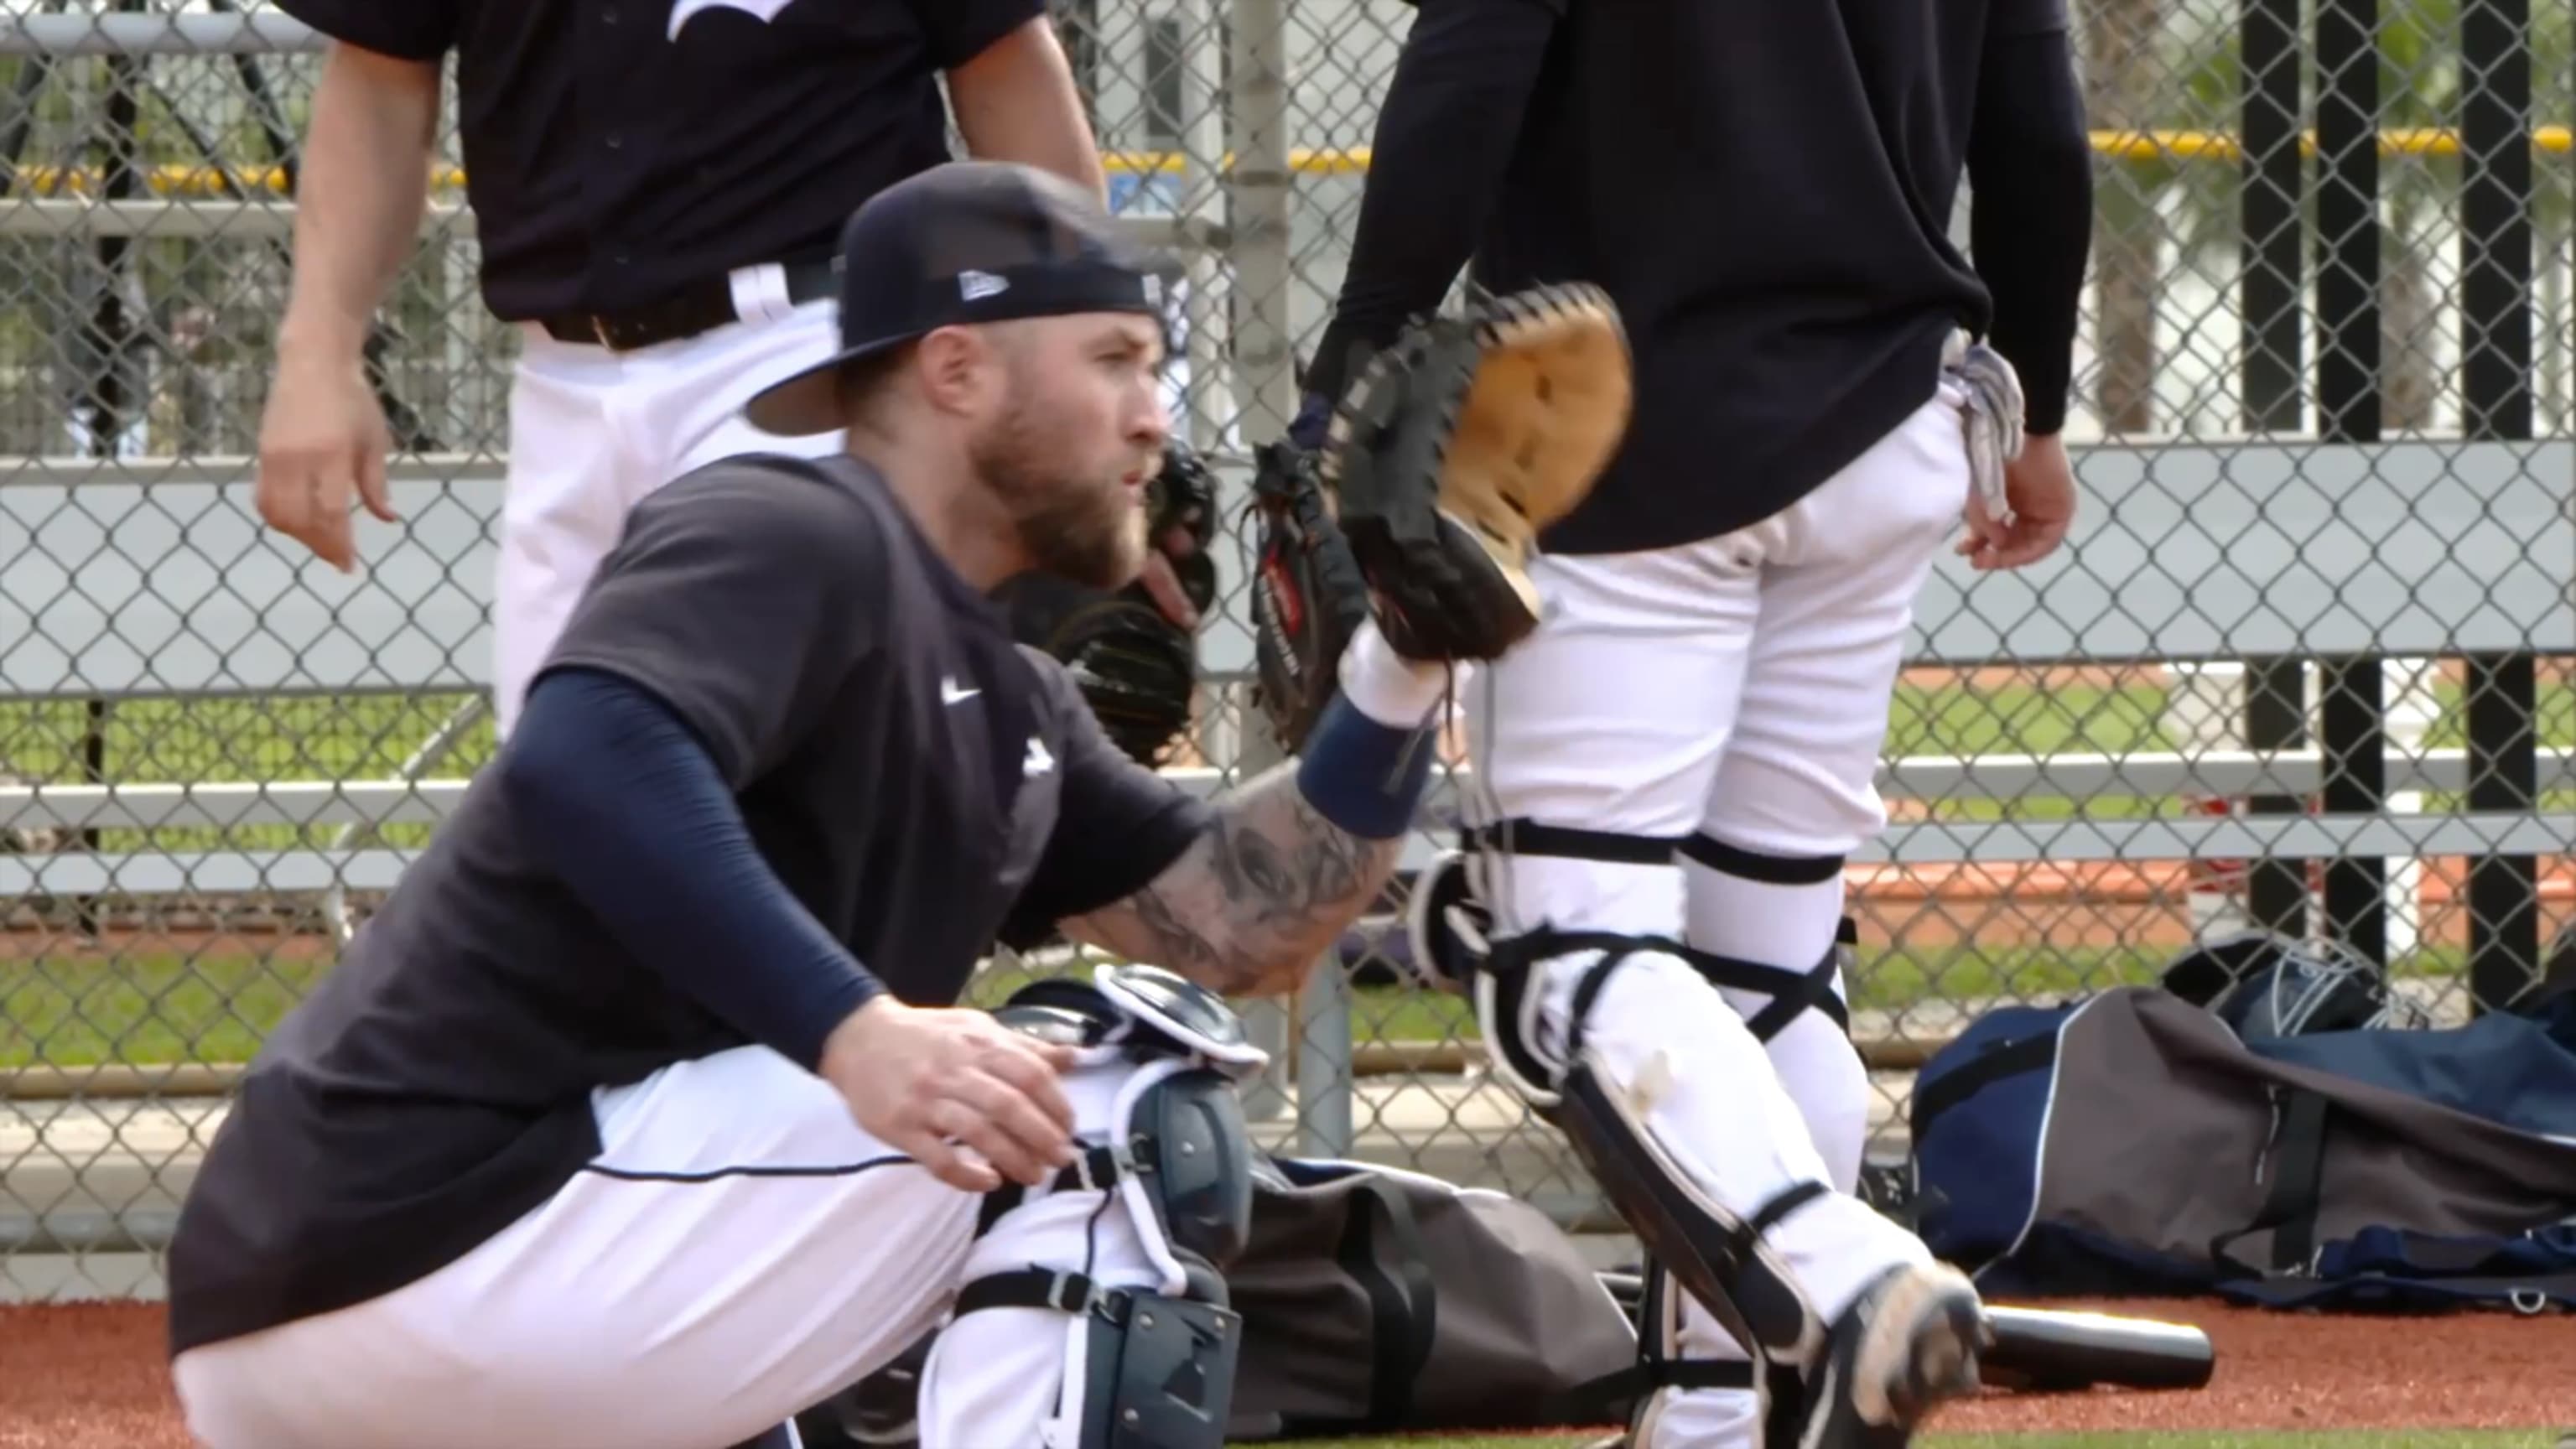 Here's an argument for bringing Tucker Barnhart back to Tigers in 2023